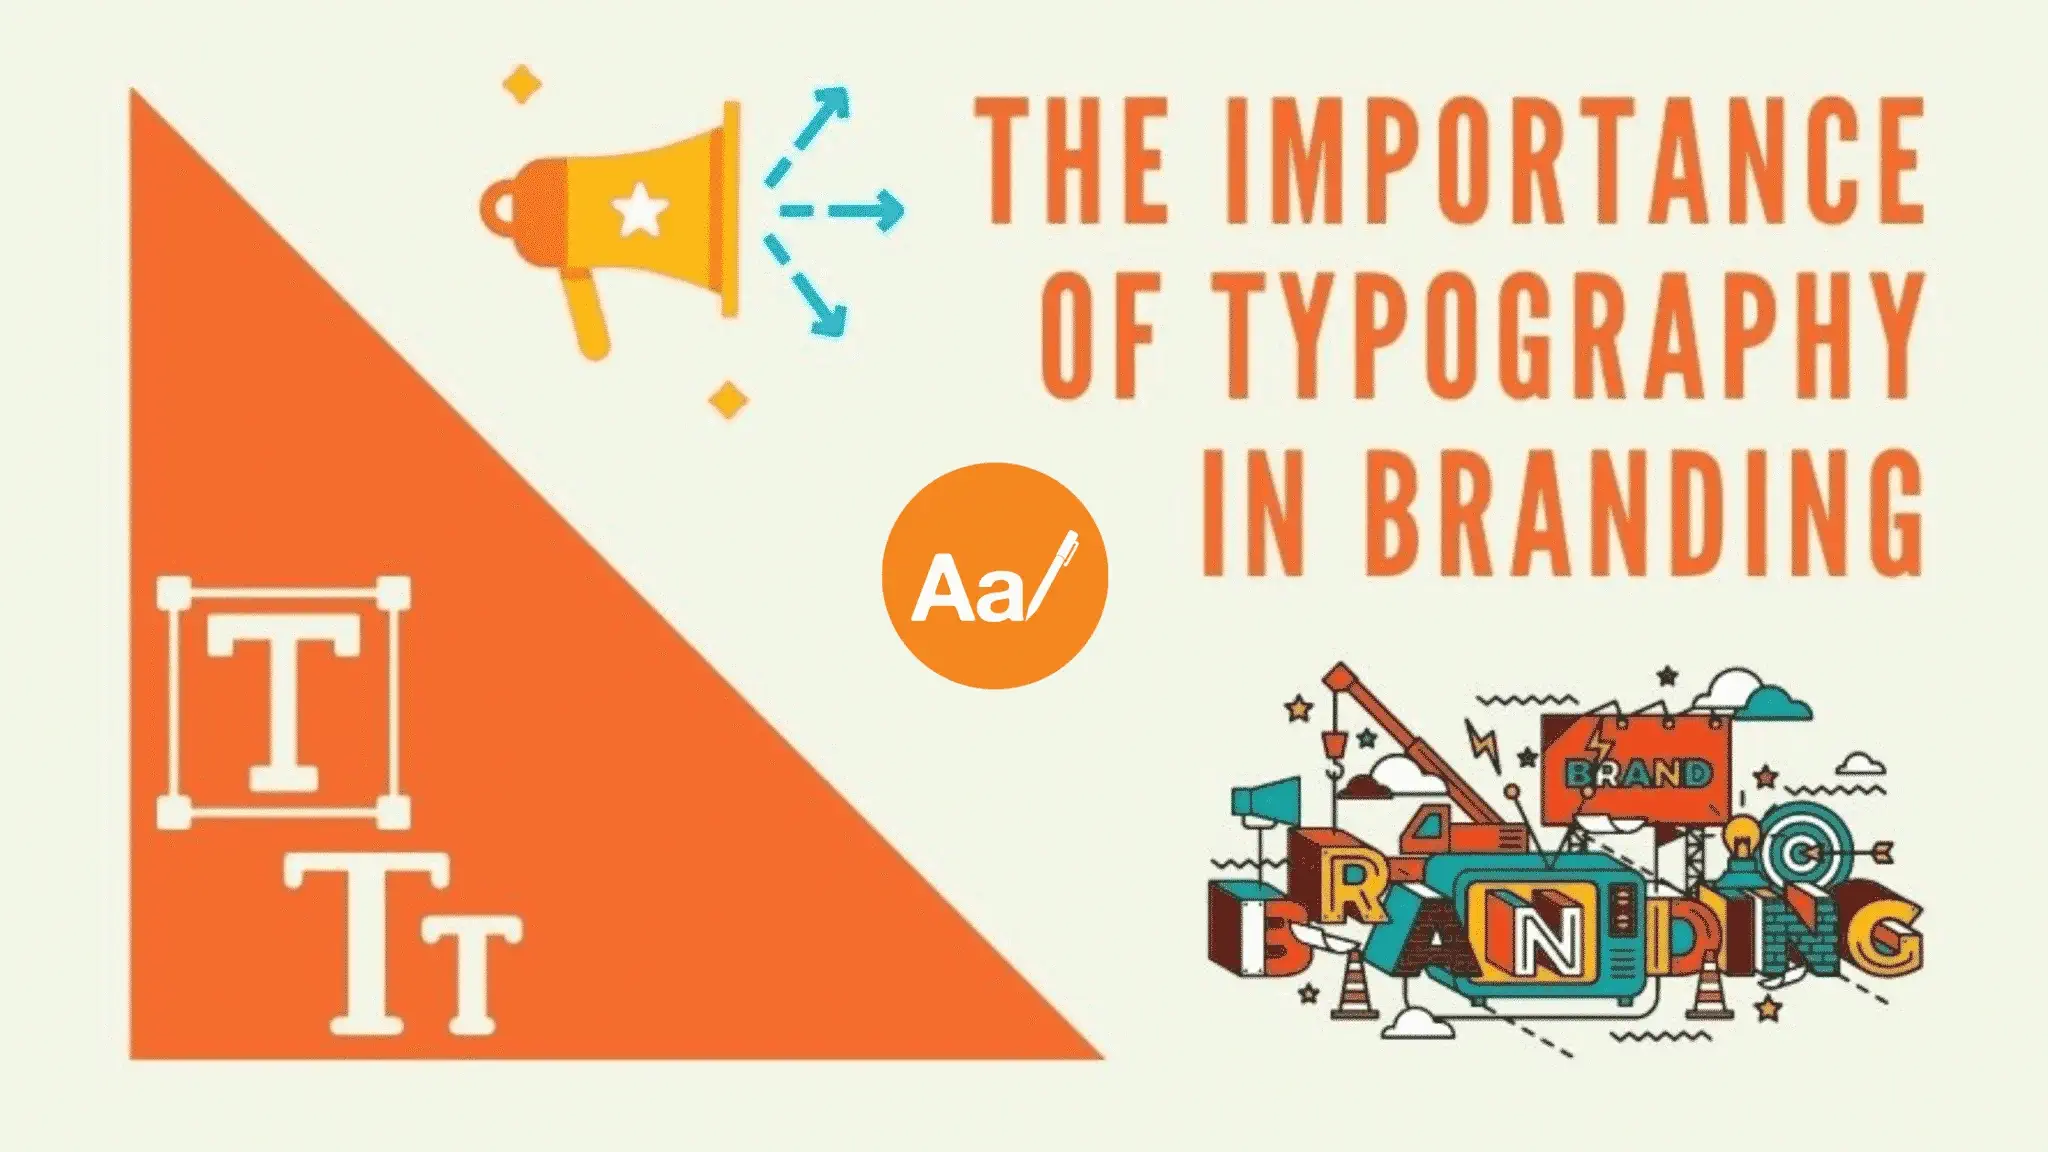 The Importance of Typography in Branding